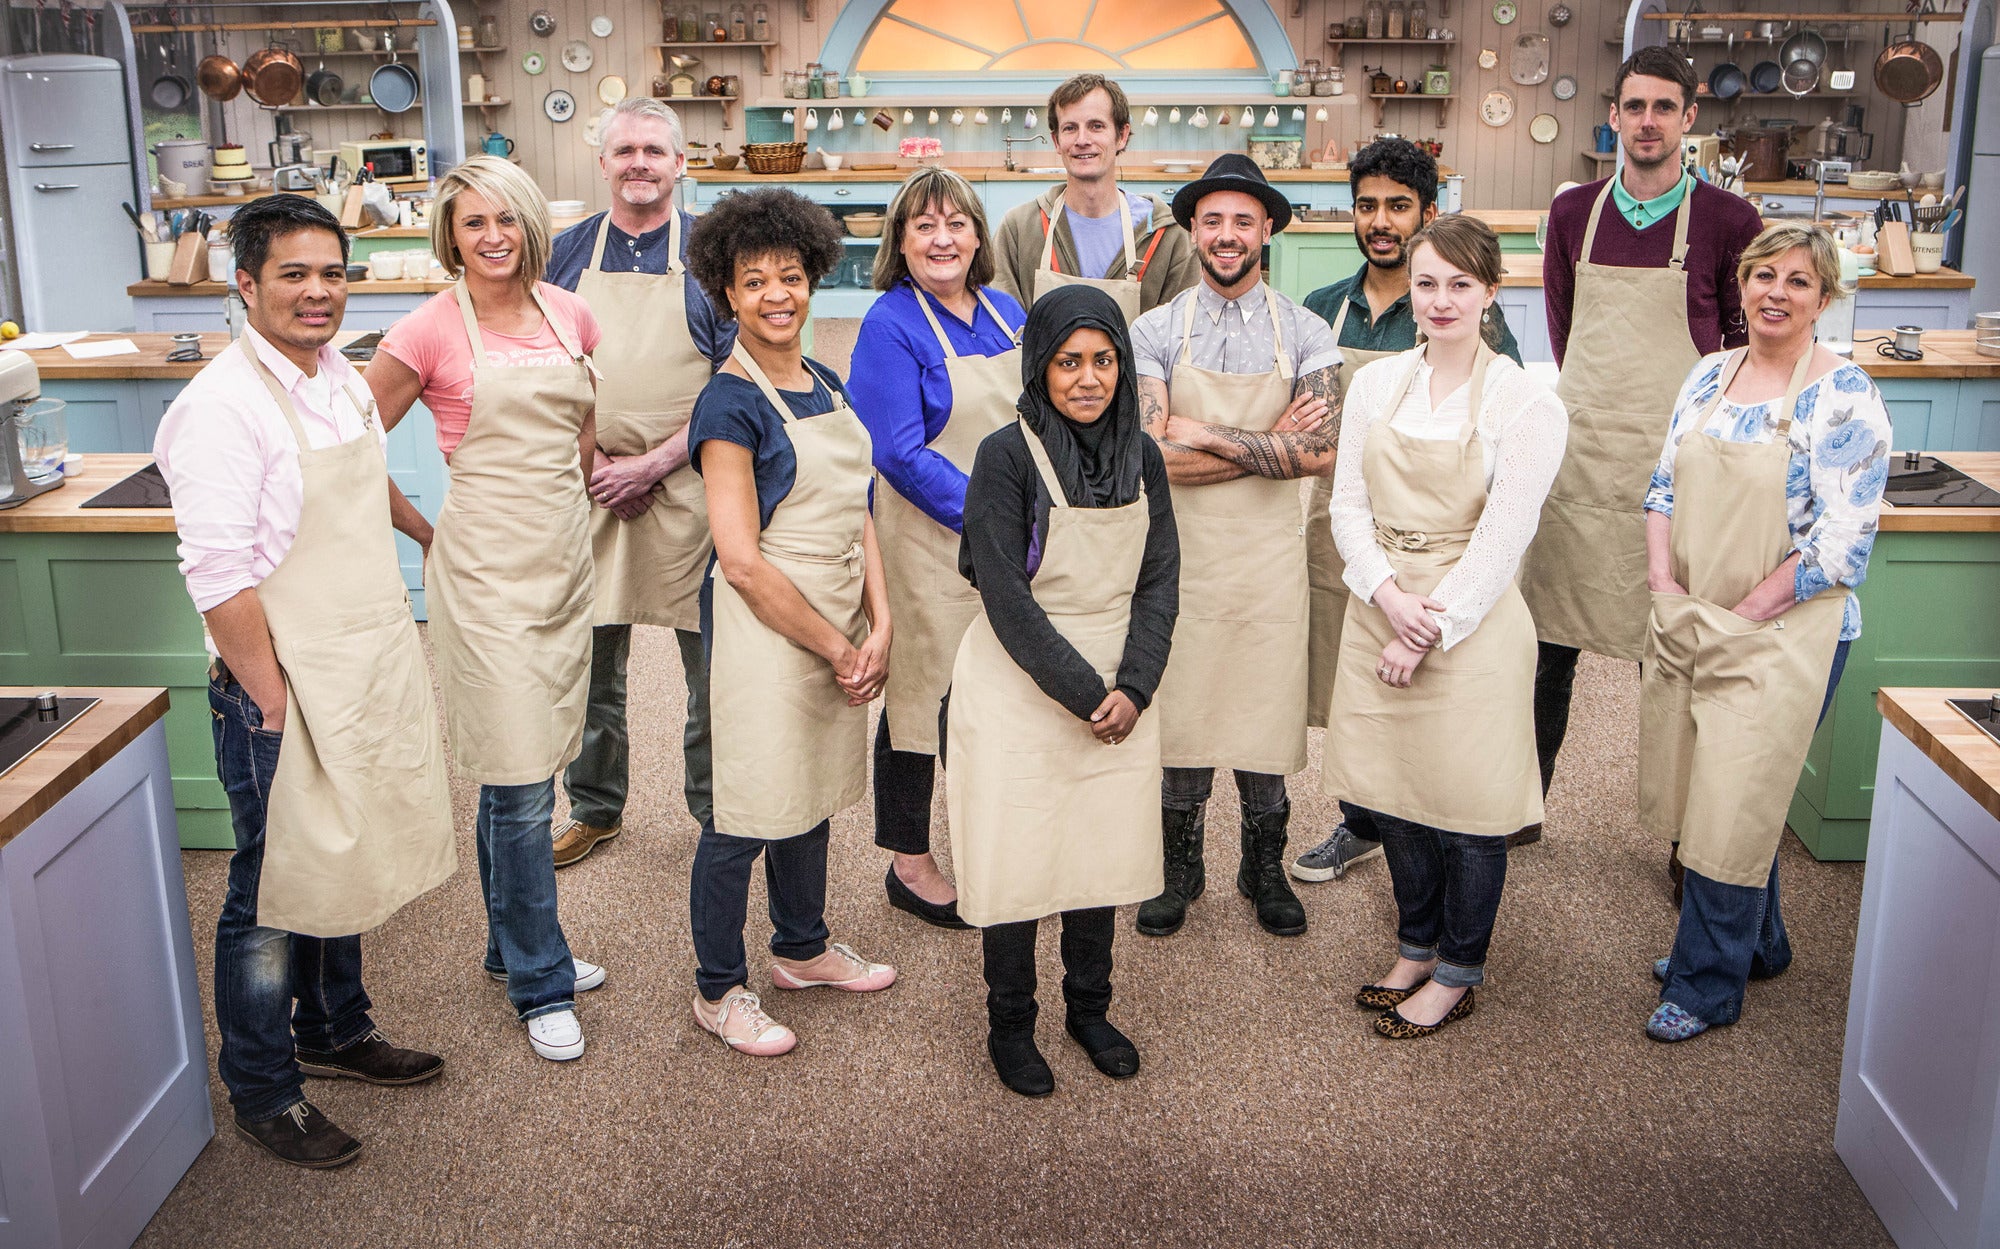 The contestants of The Great British Bake Off 2015